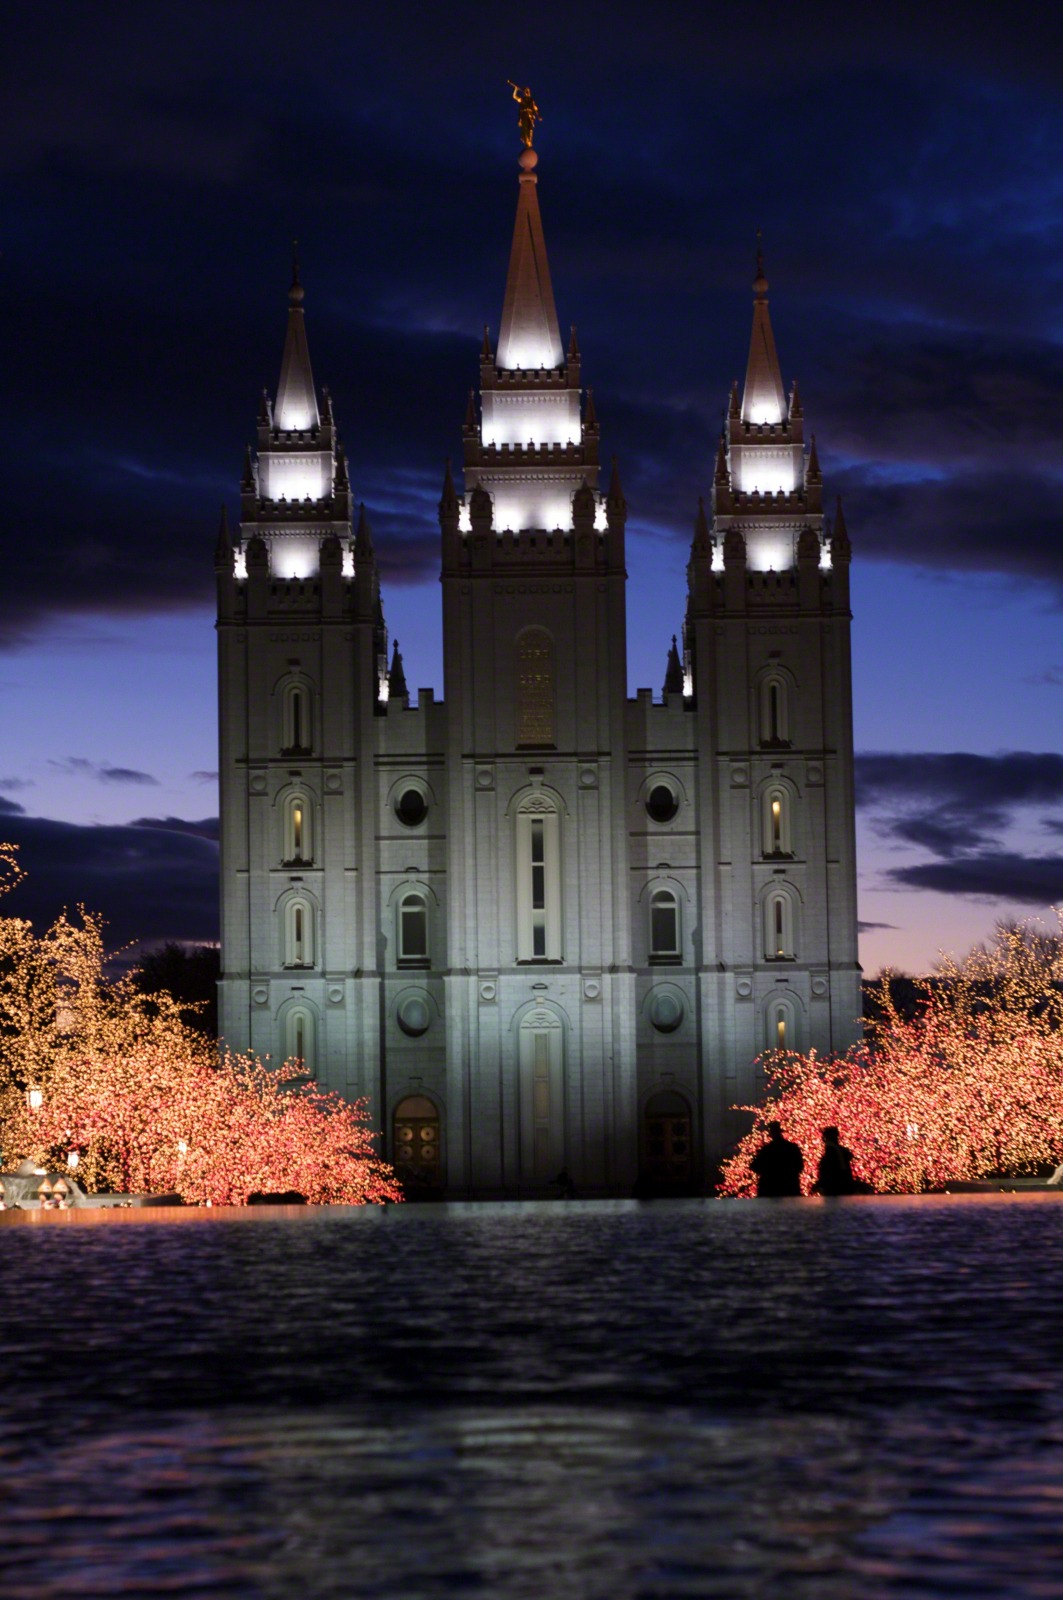 The Church of Jesus Christ of Latter day Saints